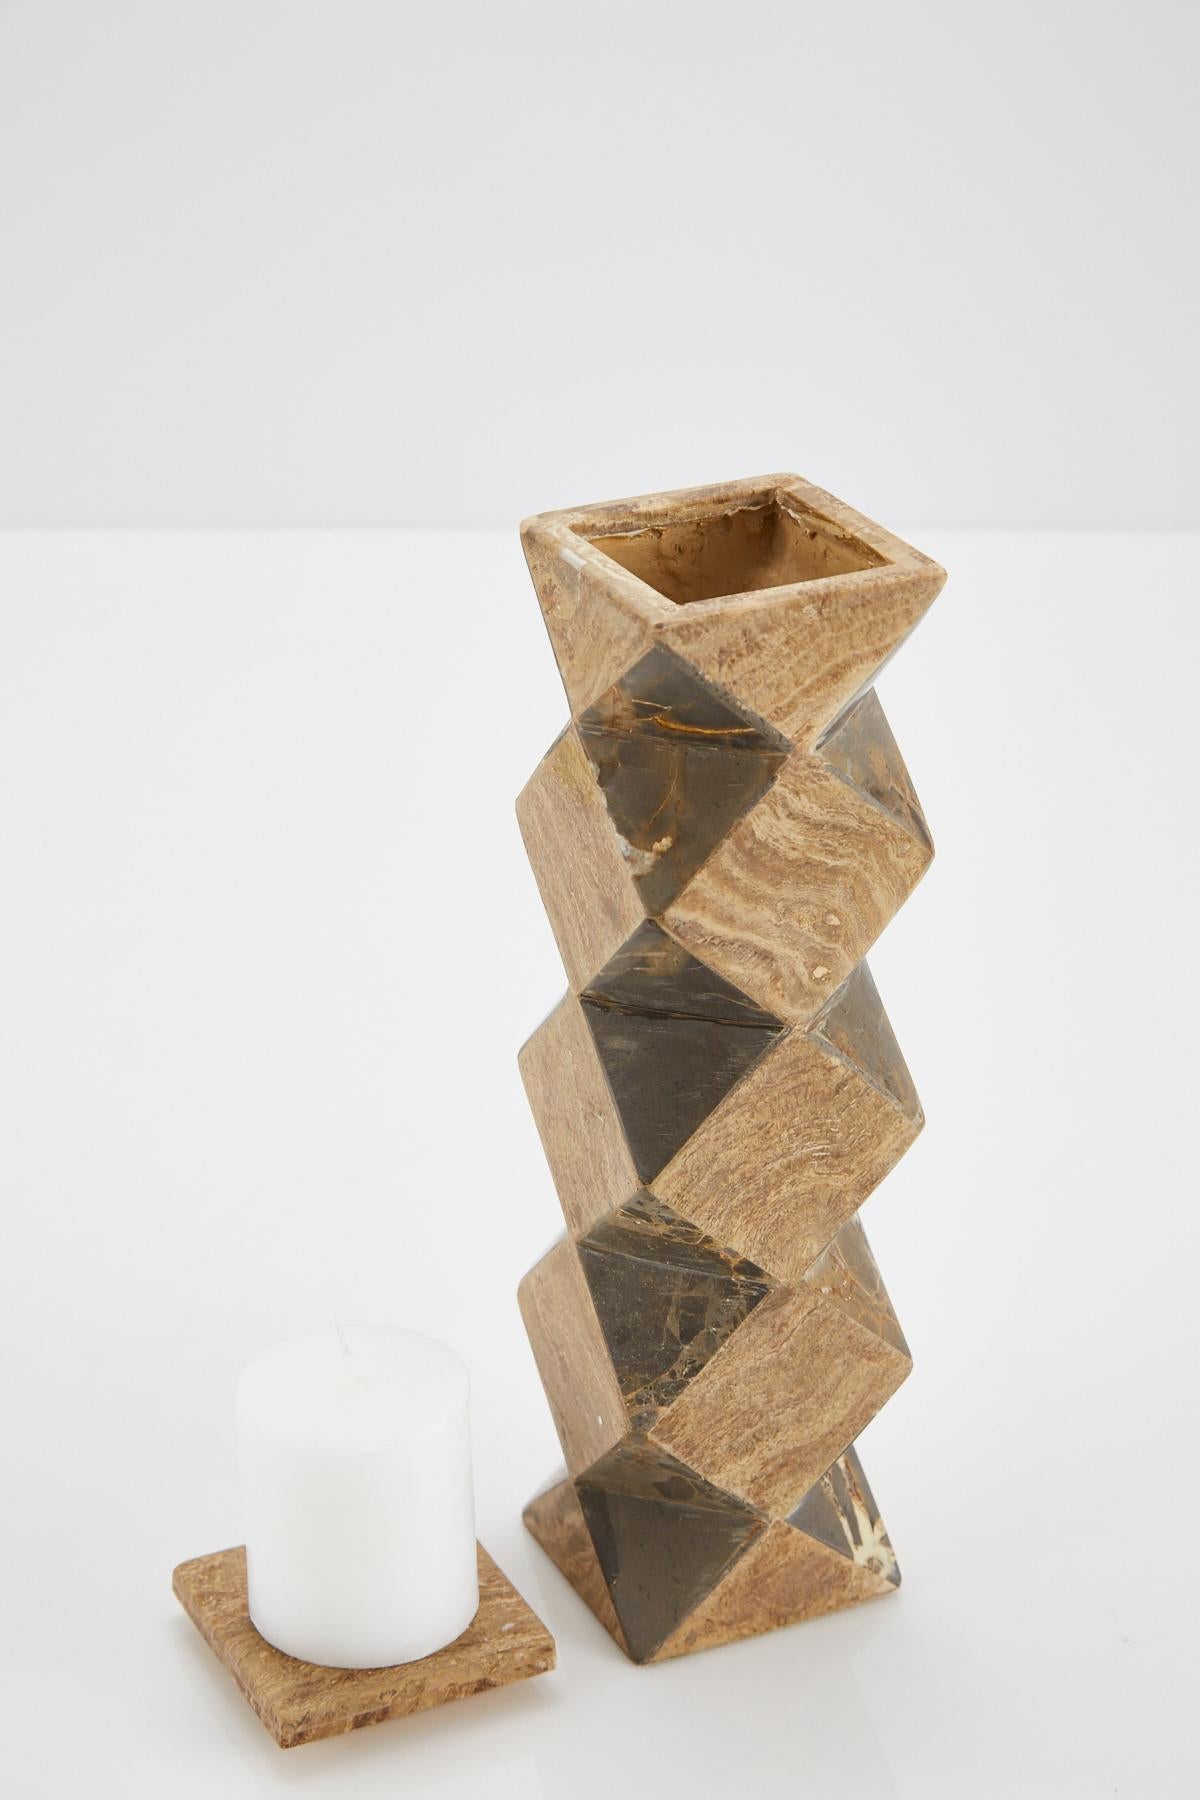 Painted Convertible Faceted Postmodern Tessellated Stone Candlestick or Vase, 1990s For Sale